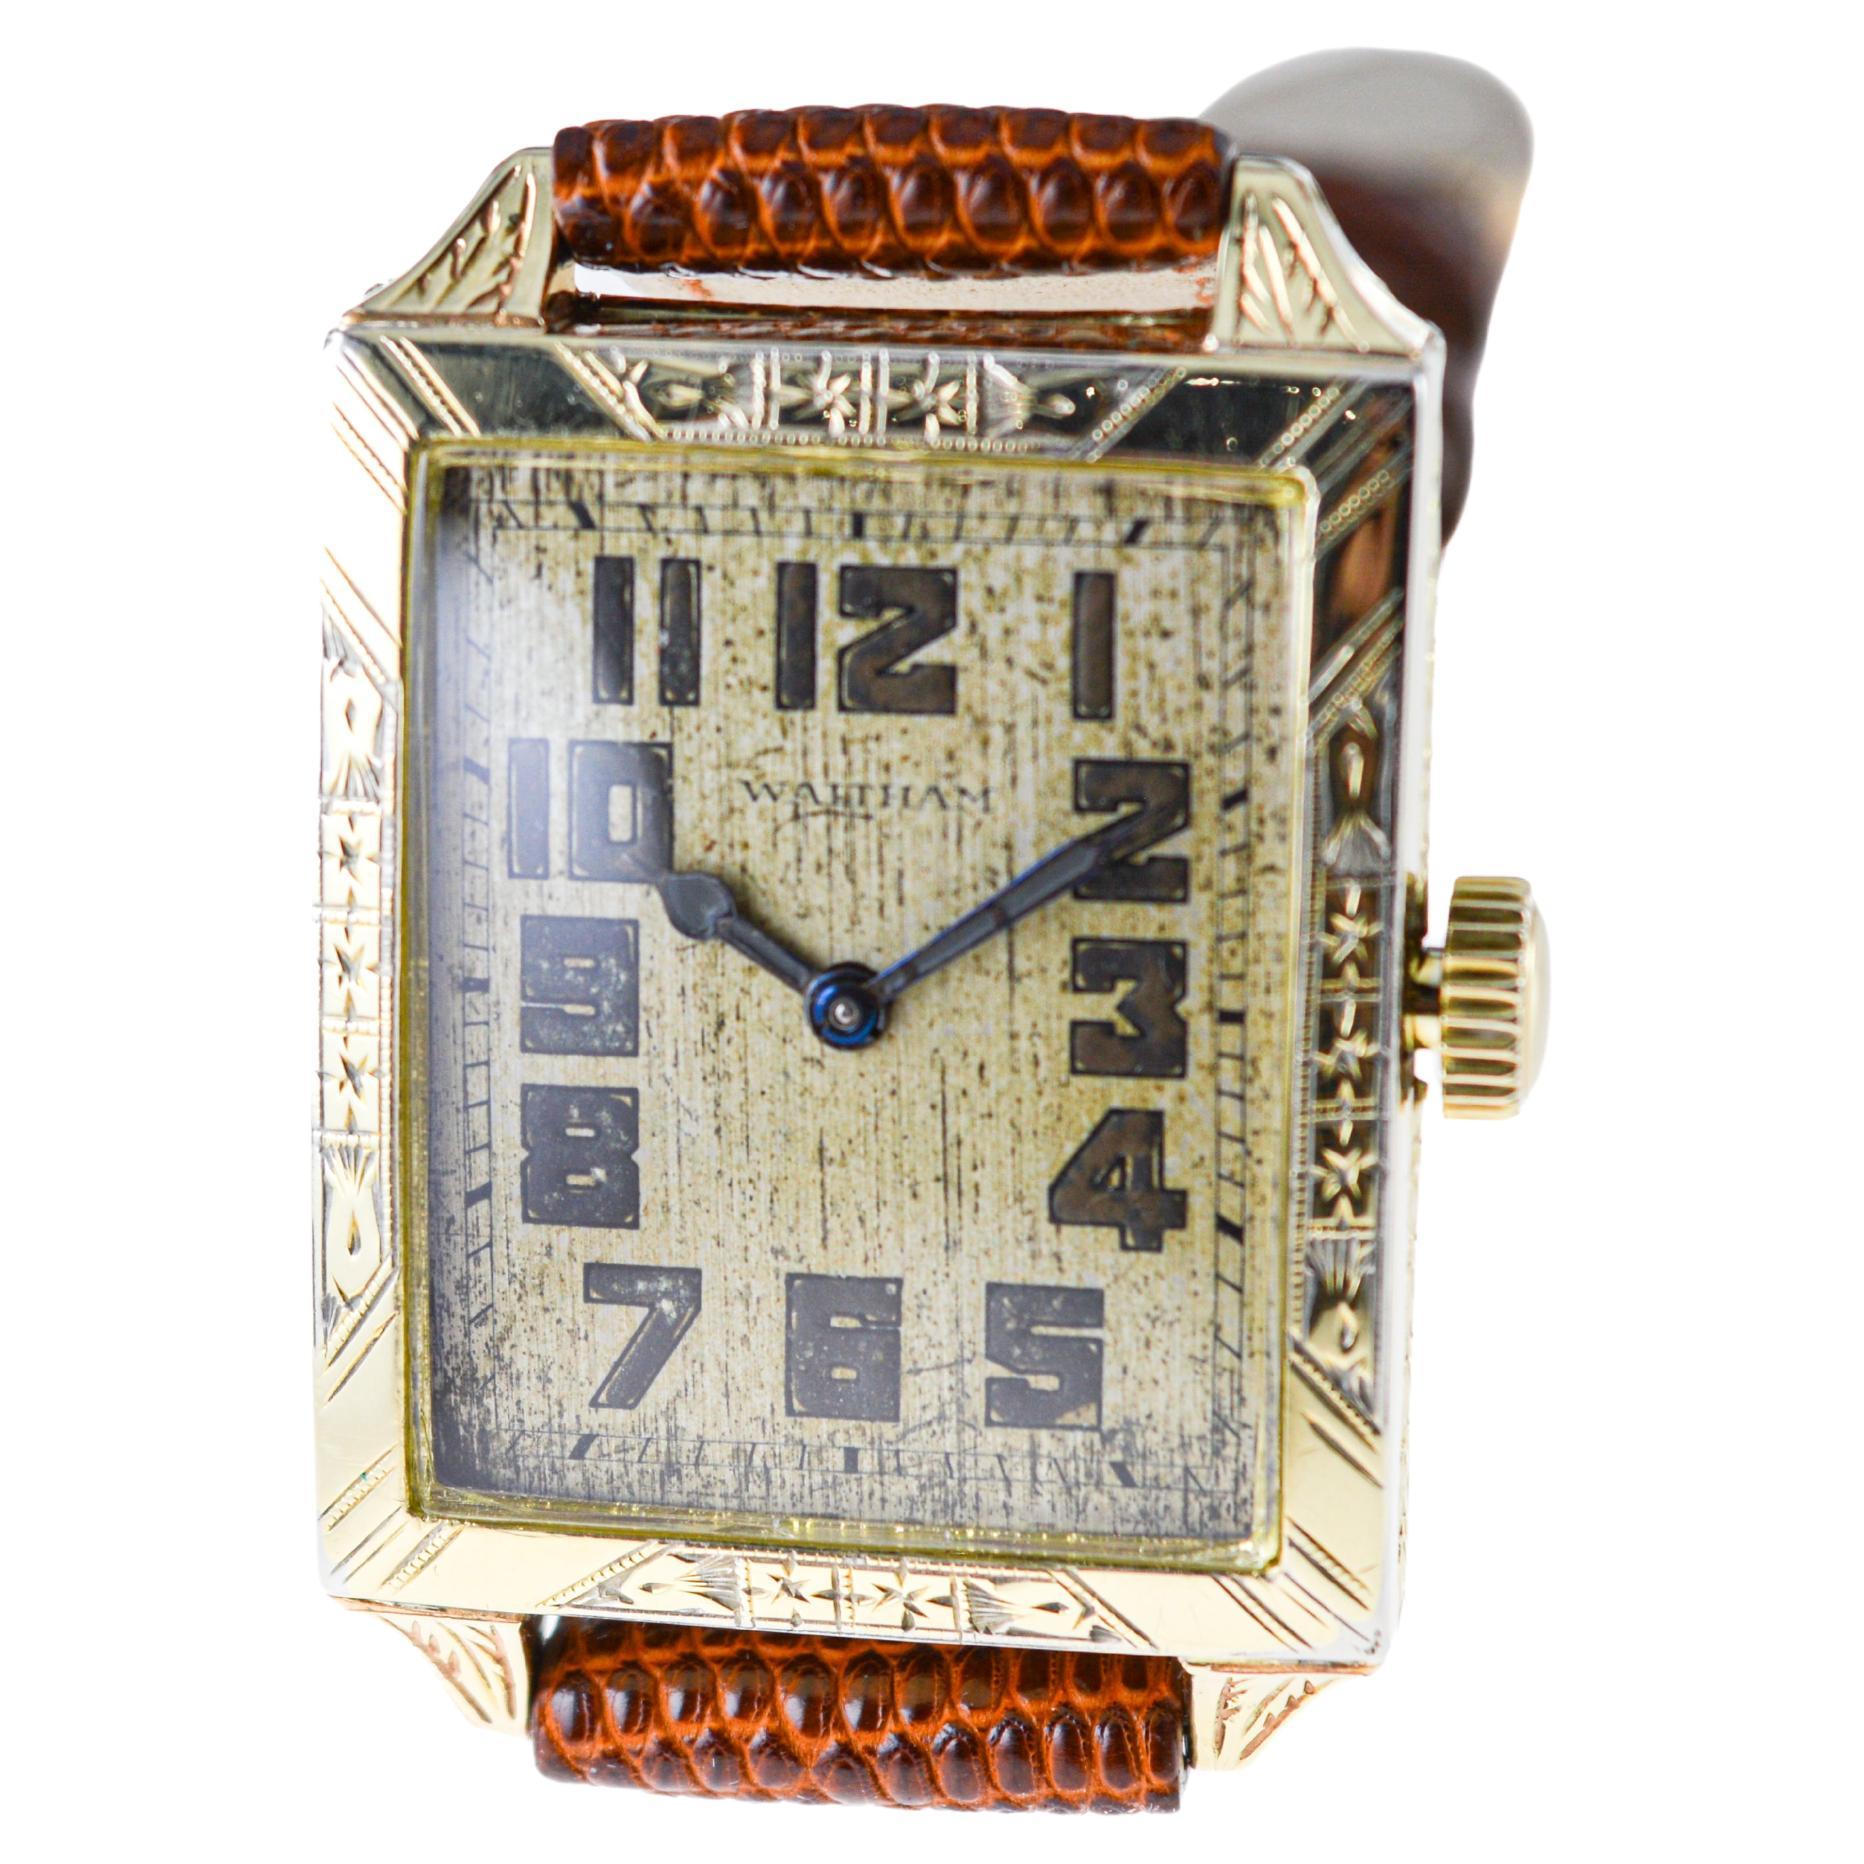 Waltham Yellow Gold Filled Art Deco Watch with Original Dial from 1926 For Sale 6